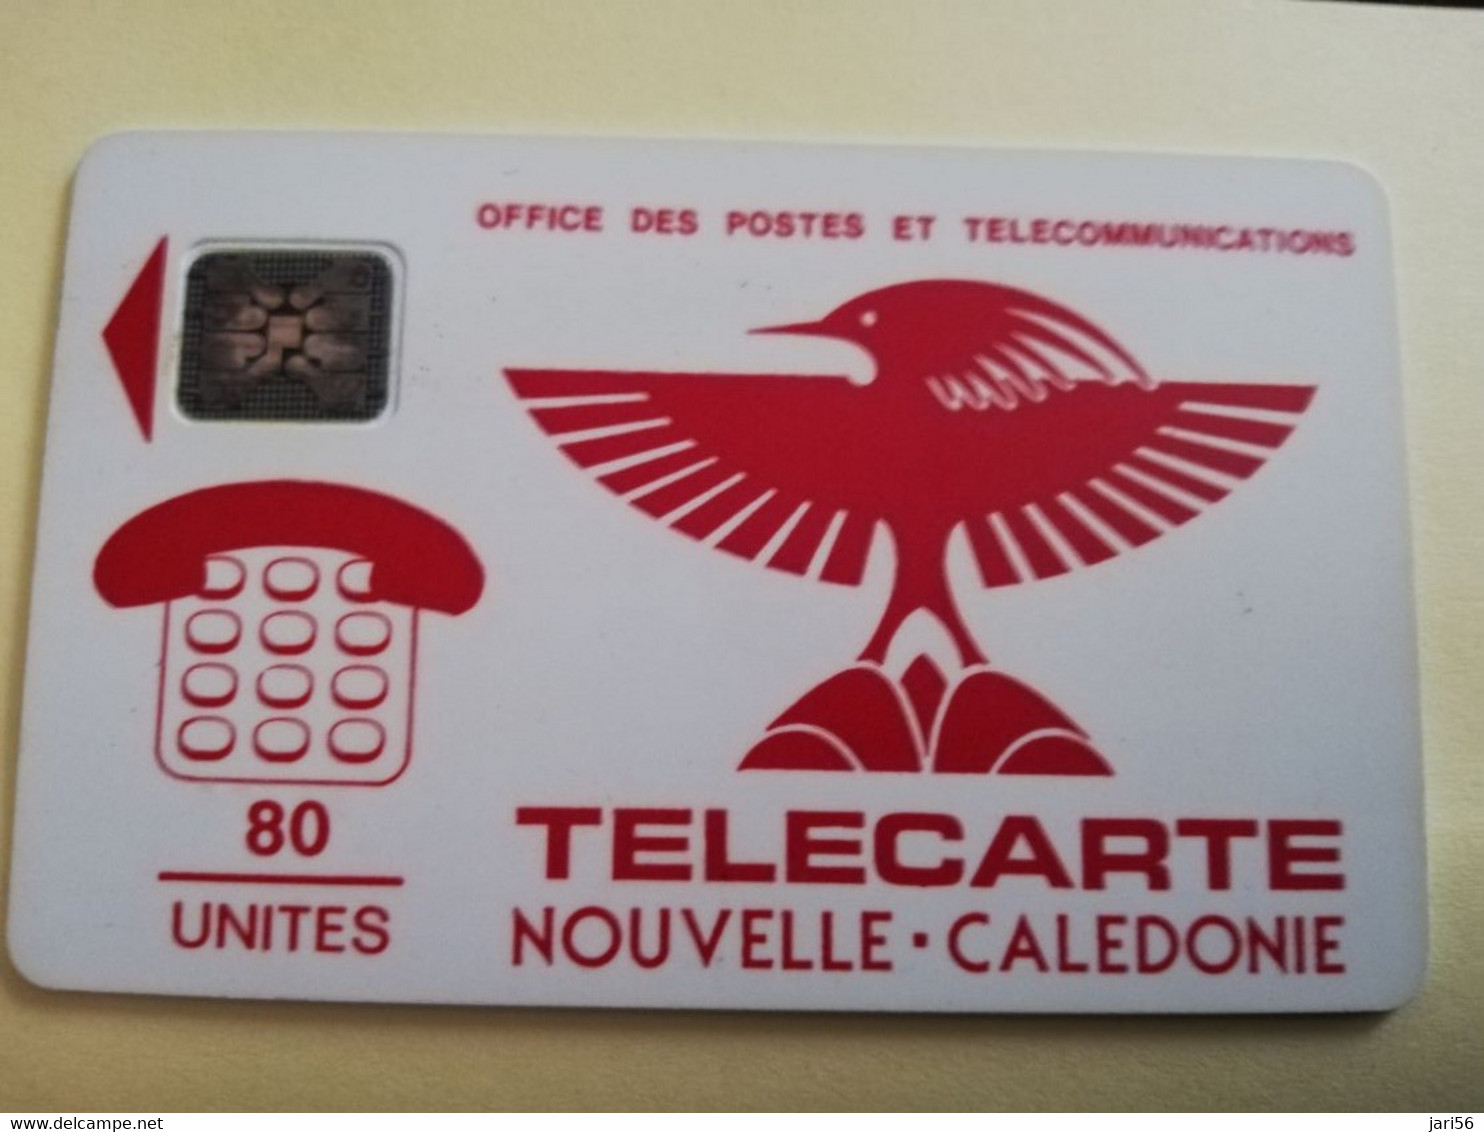 NOUVELLE CALEDONIA  CHIP CARD 85 UNITS BIRD LOGO  RED   ** 3485 ** - Nuova Caledonia